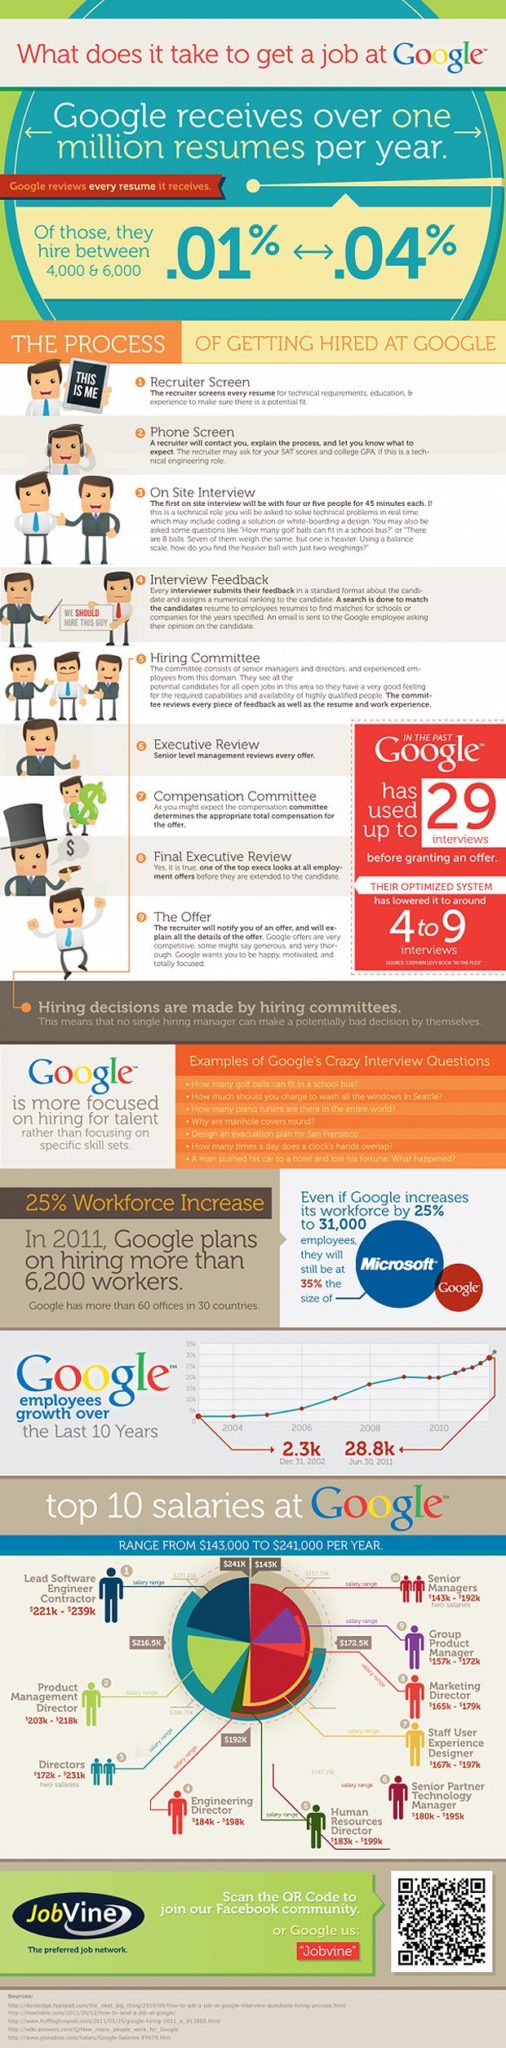 What Does It Take To Get A Job At Google - Infographic